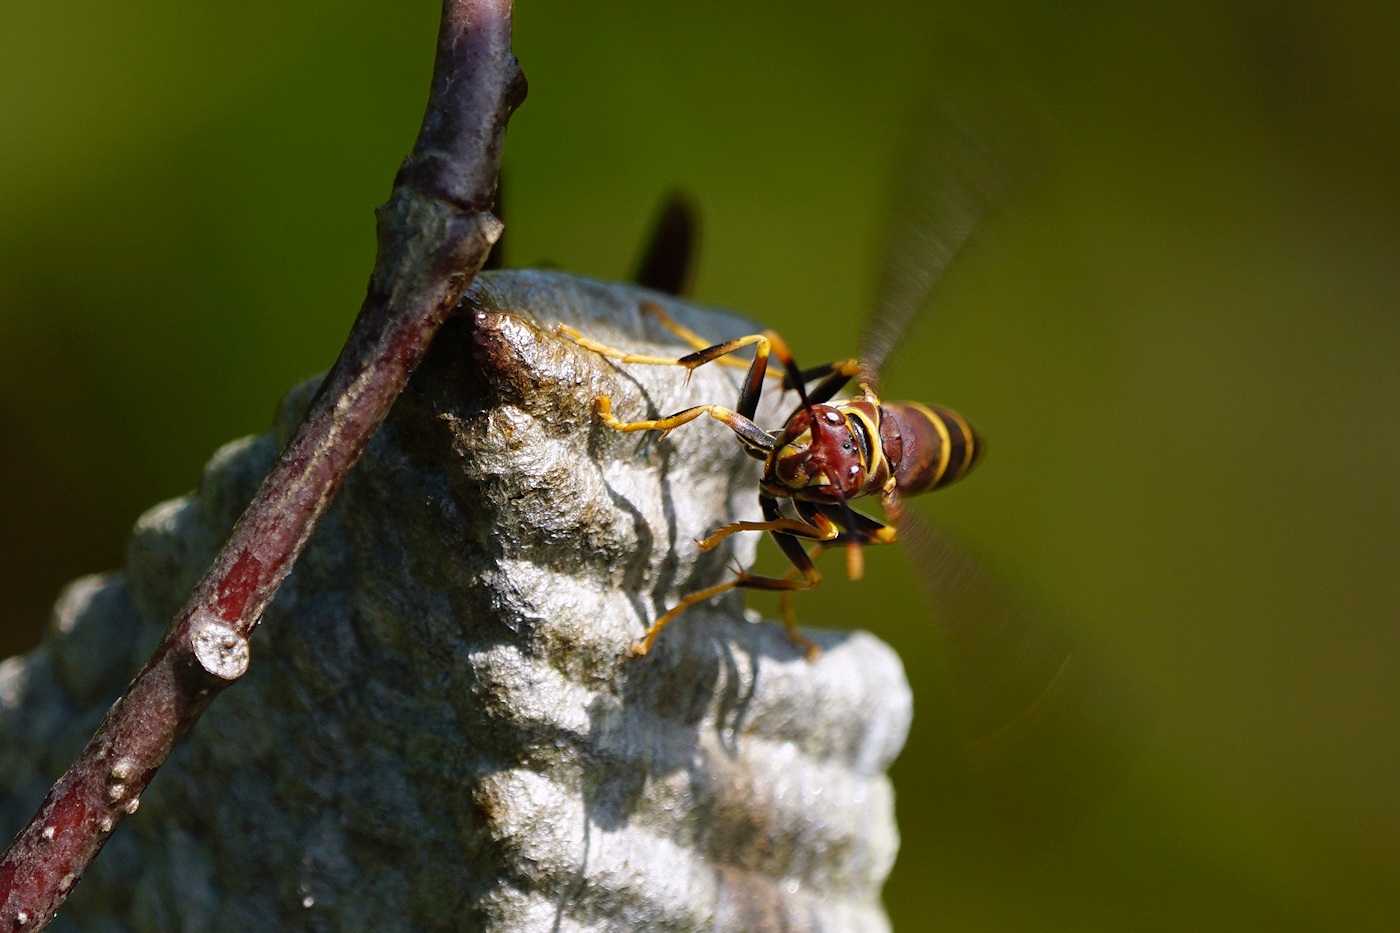 Paper wasp sees me and revs up to attack